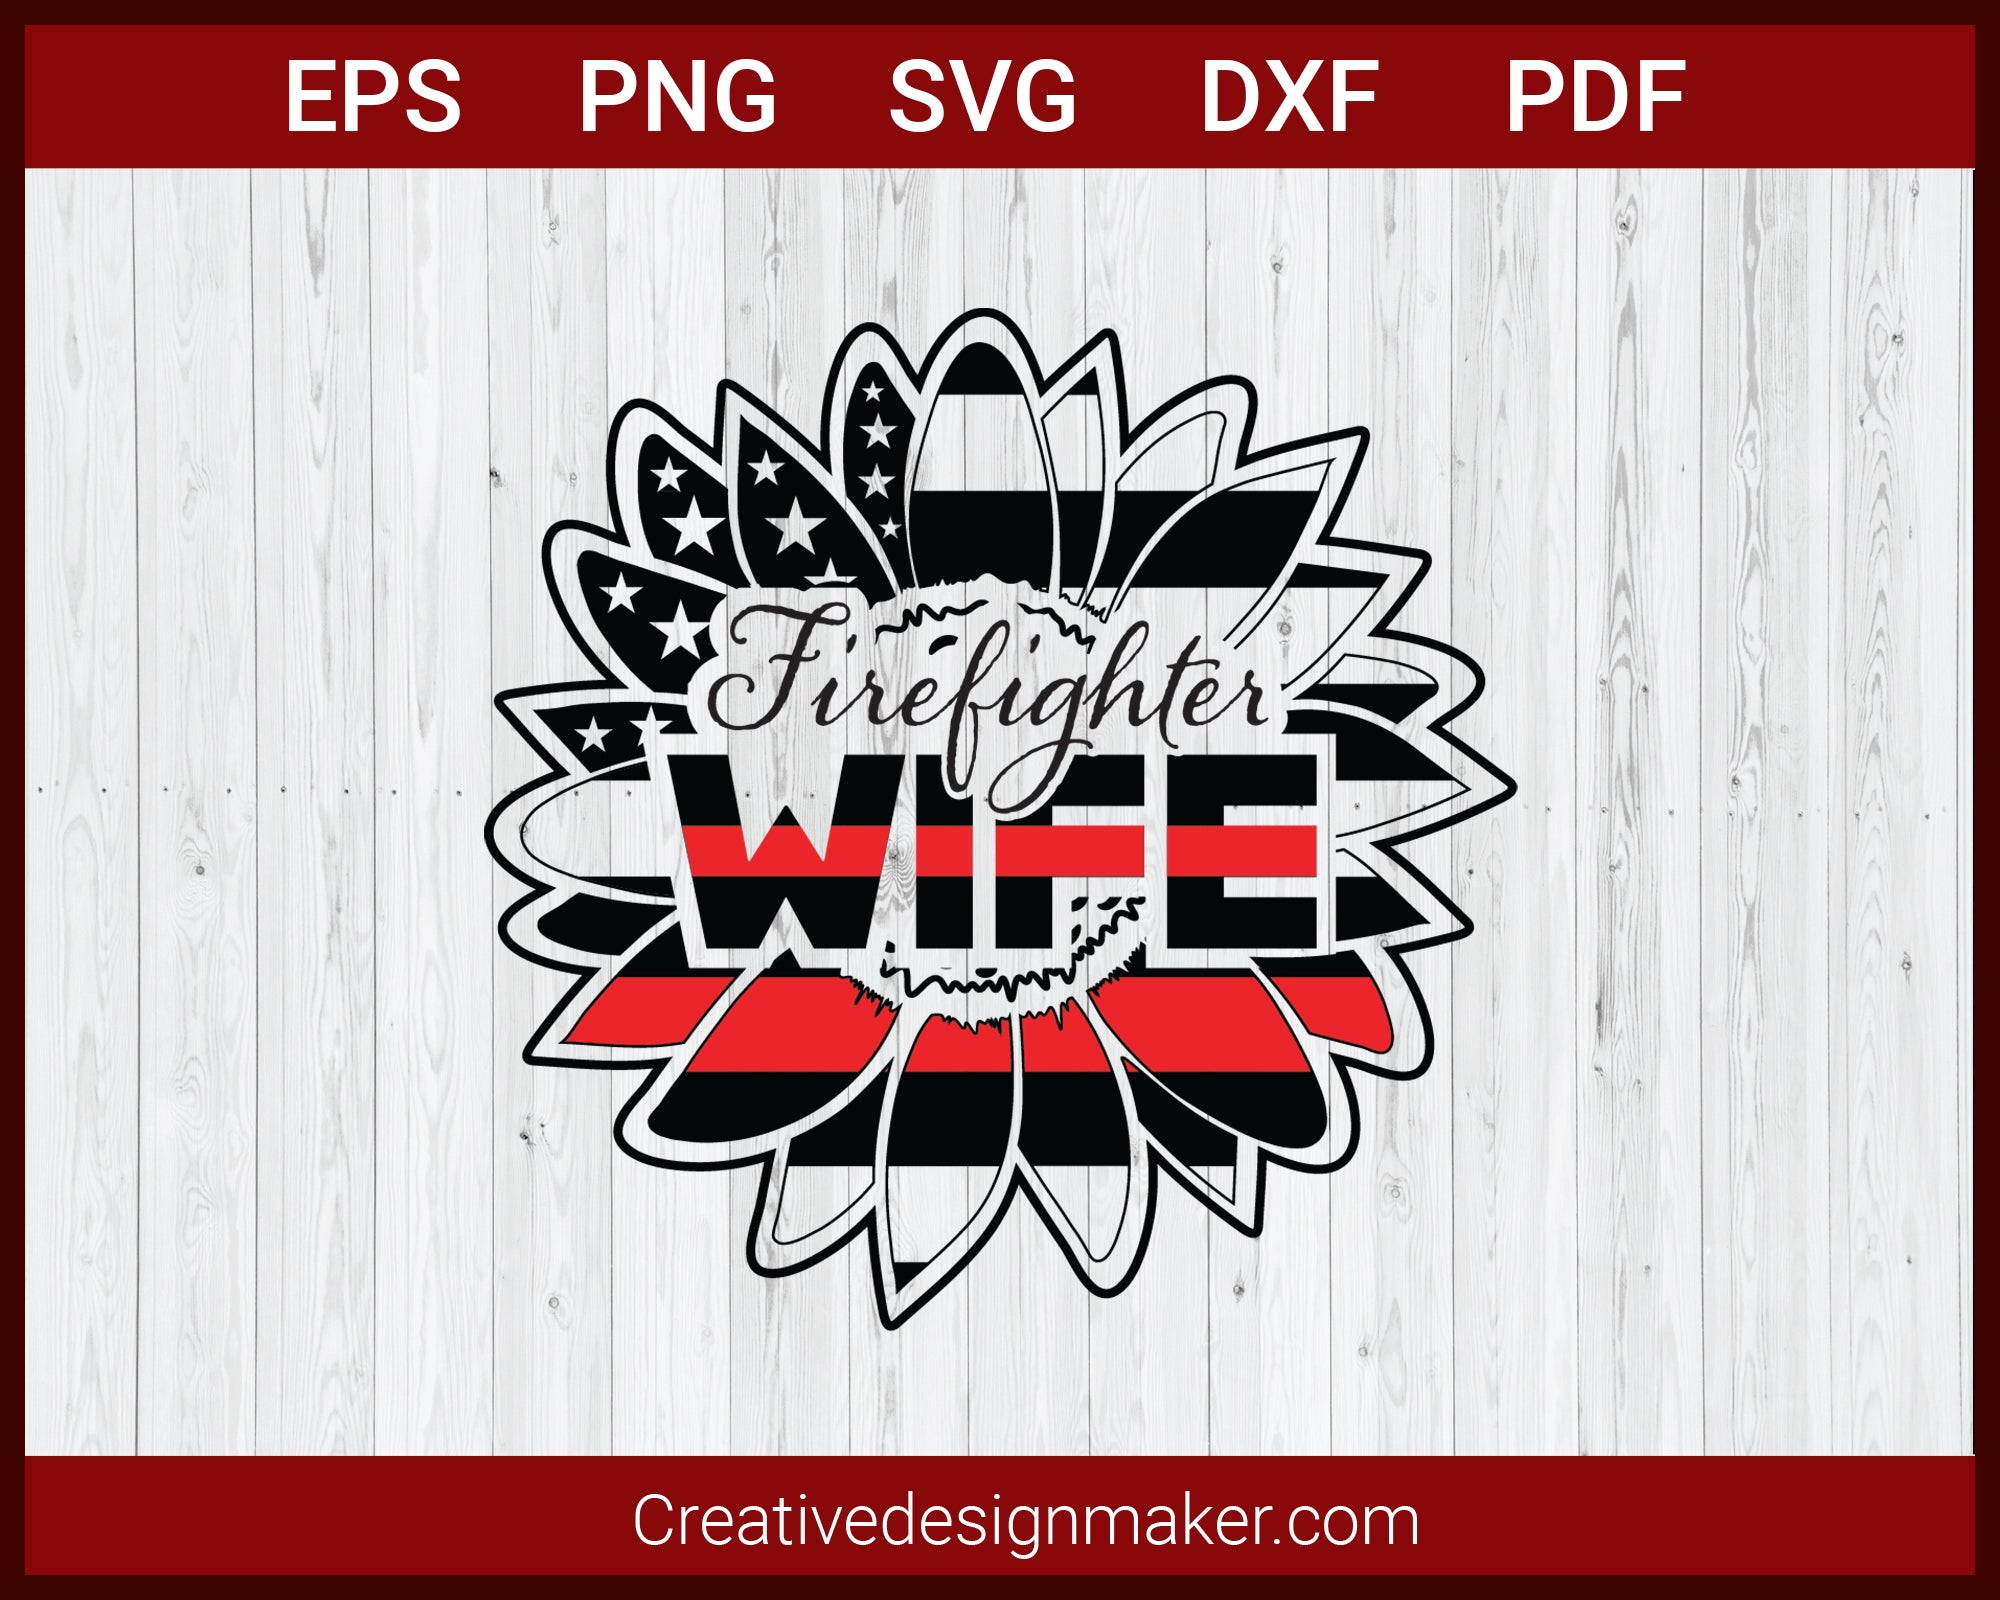 Firefighter Wife Red Line Patriotic Sunflower SVG Cricut Silhouette DXF PNG EPS Cut File